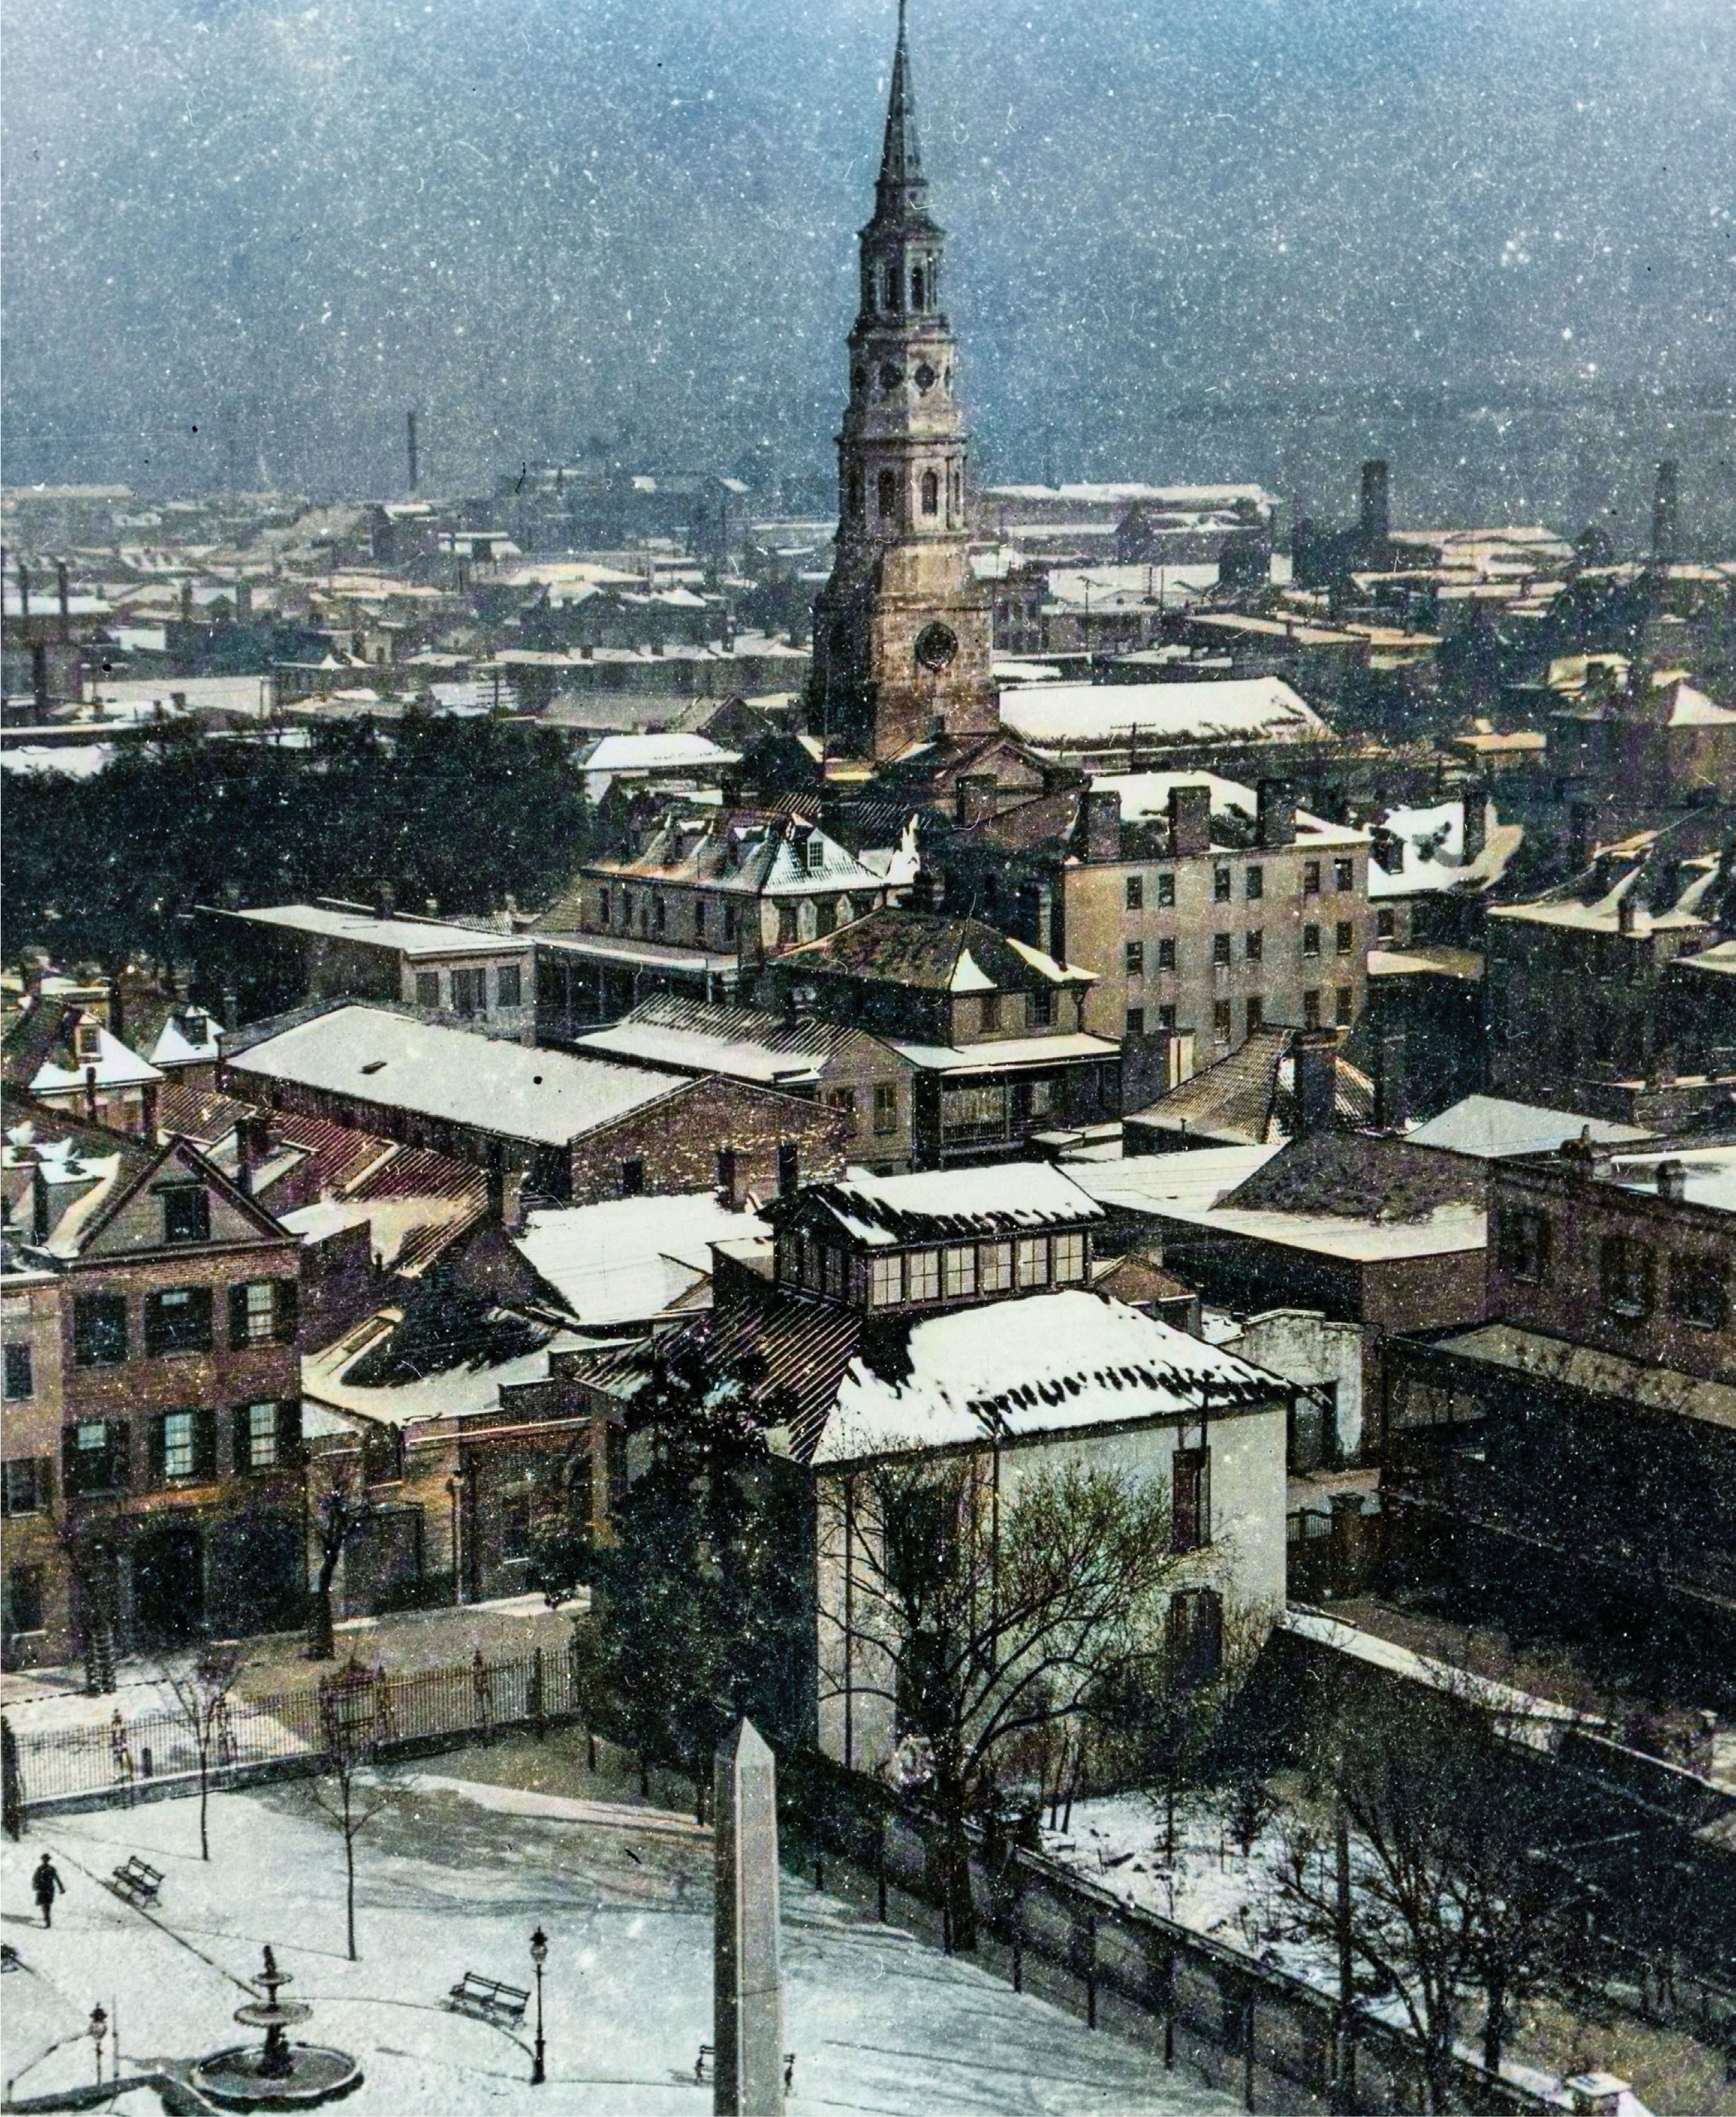 Snowy Rooftops of Charleston, 1899, by Robert Achurch (1866-1943) Climbing high above the city, Achurch focused his camera on the parallel line between the Washington Light Infantry monument and St. Philip’s Church.